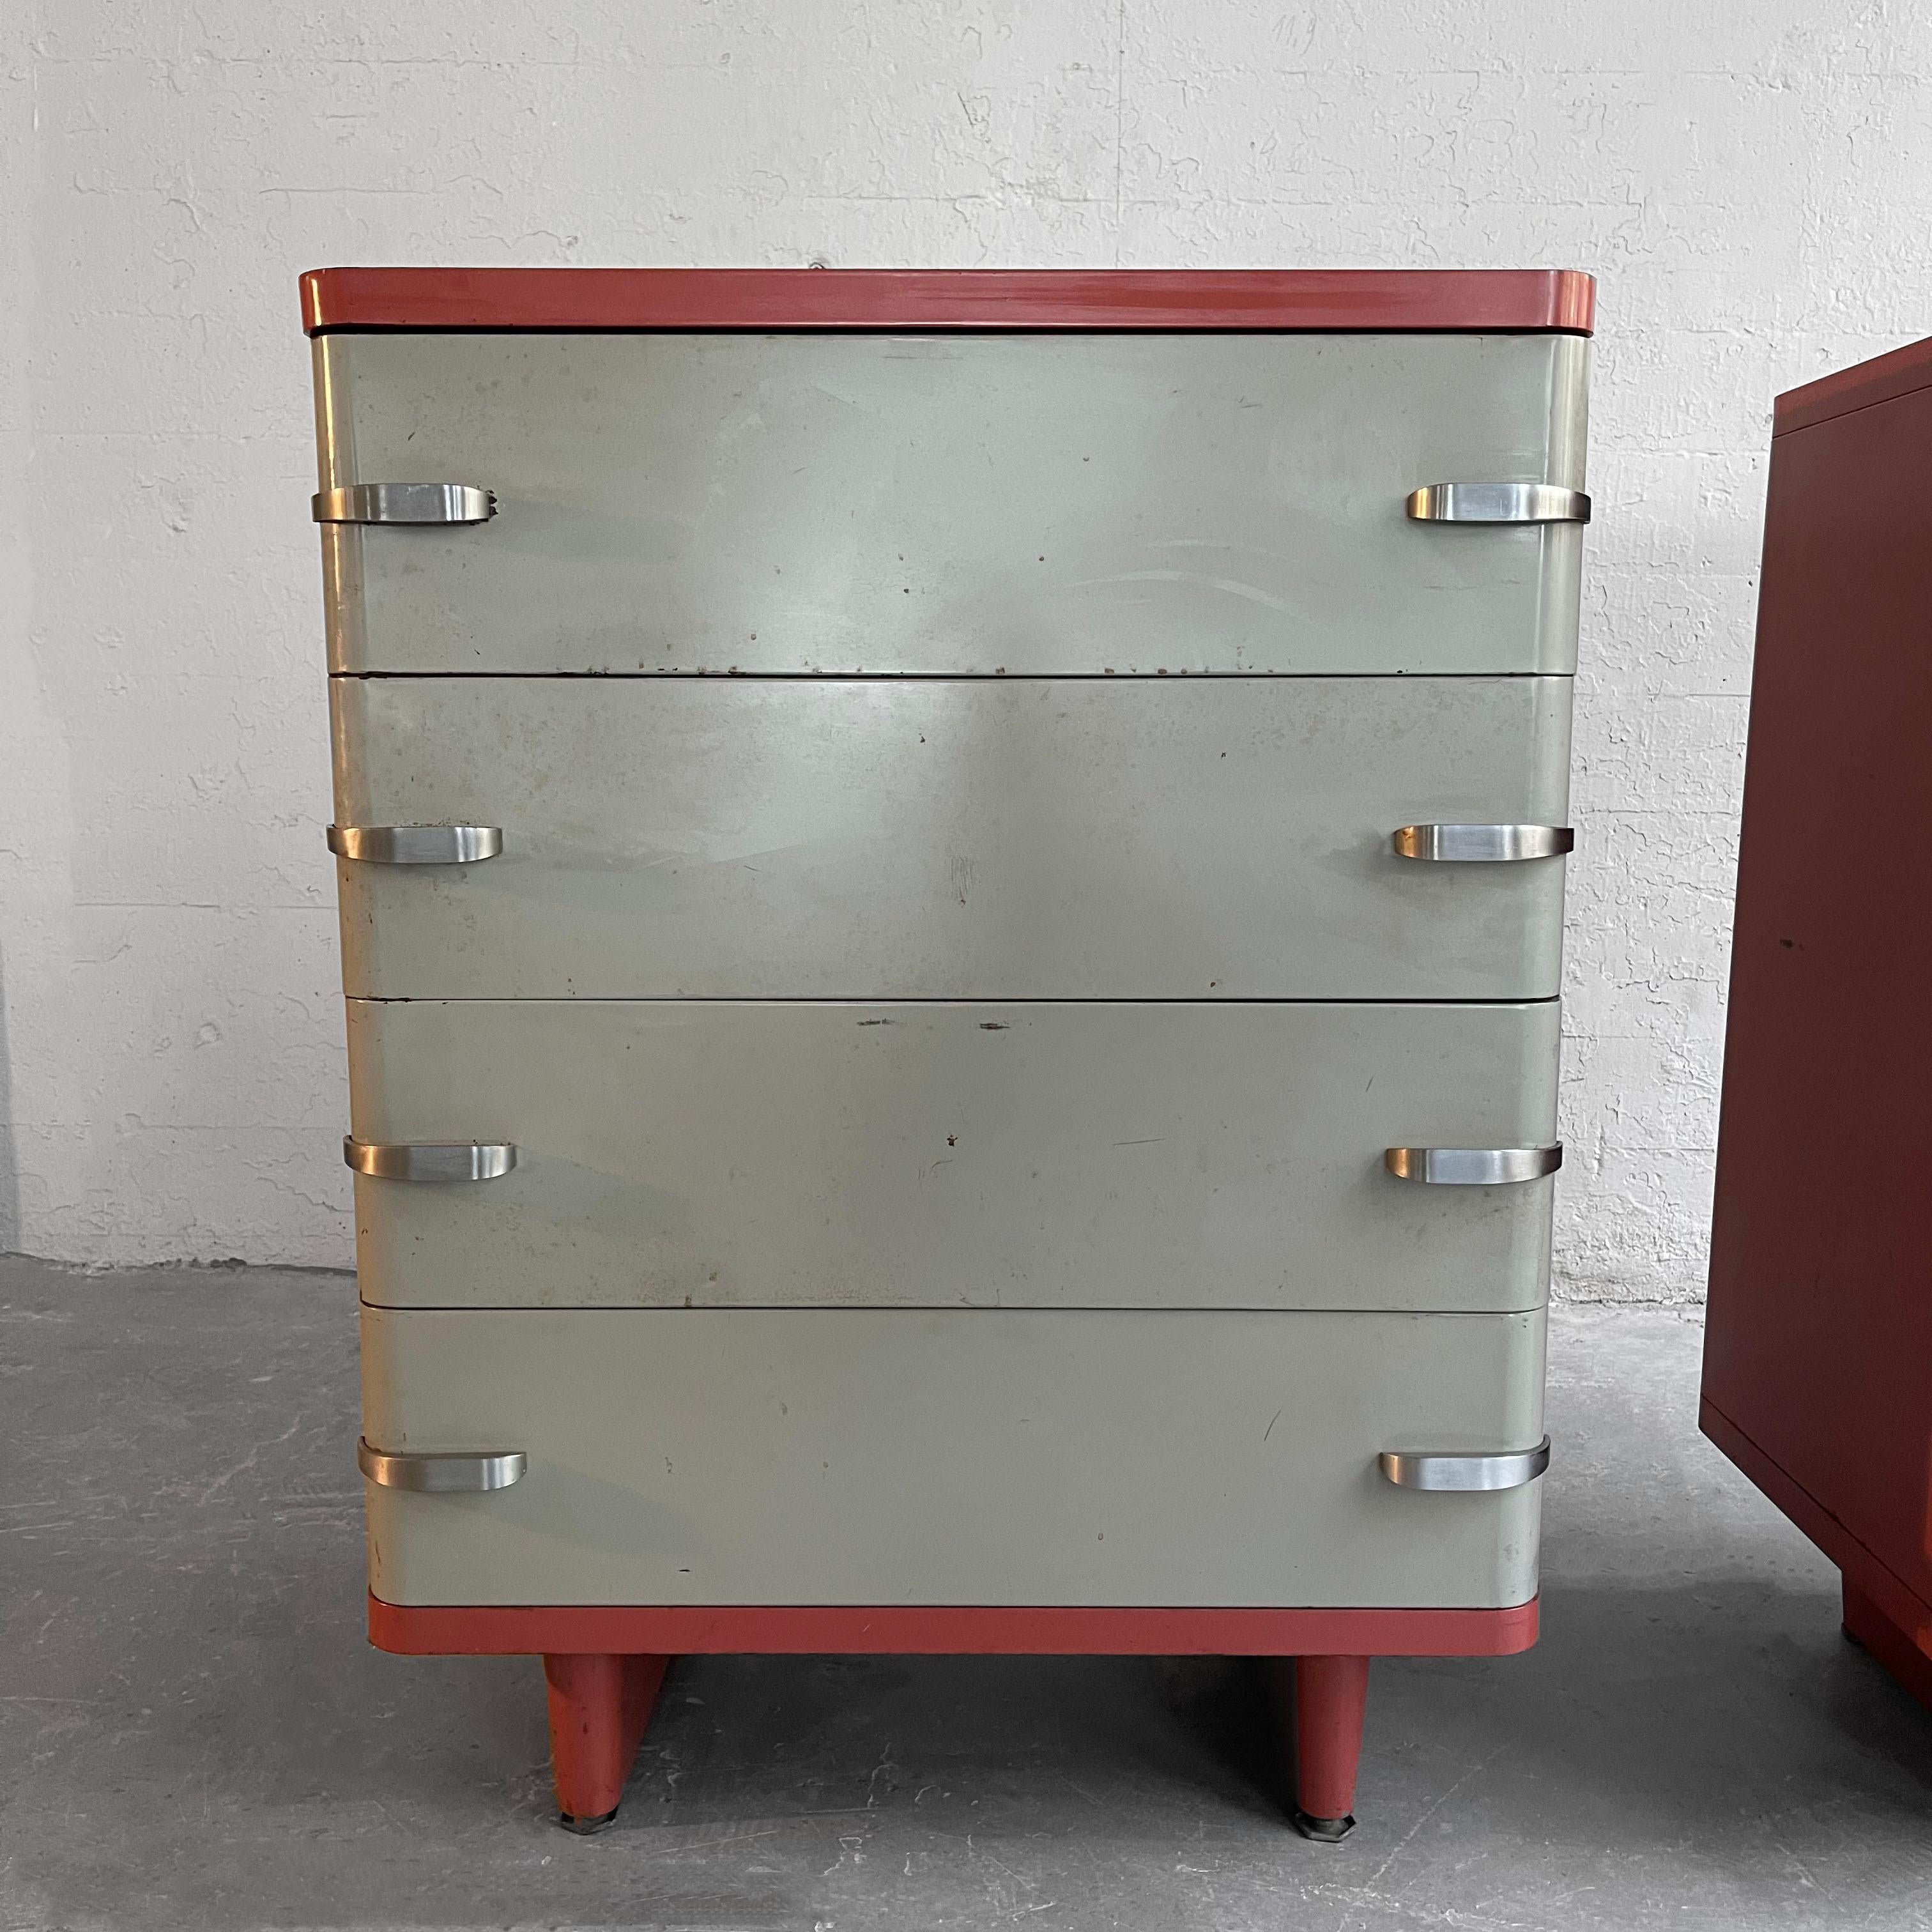 Machine-Age Painted Steel Highboy Dressers by Norman Bel Geddes For Sale 2